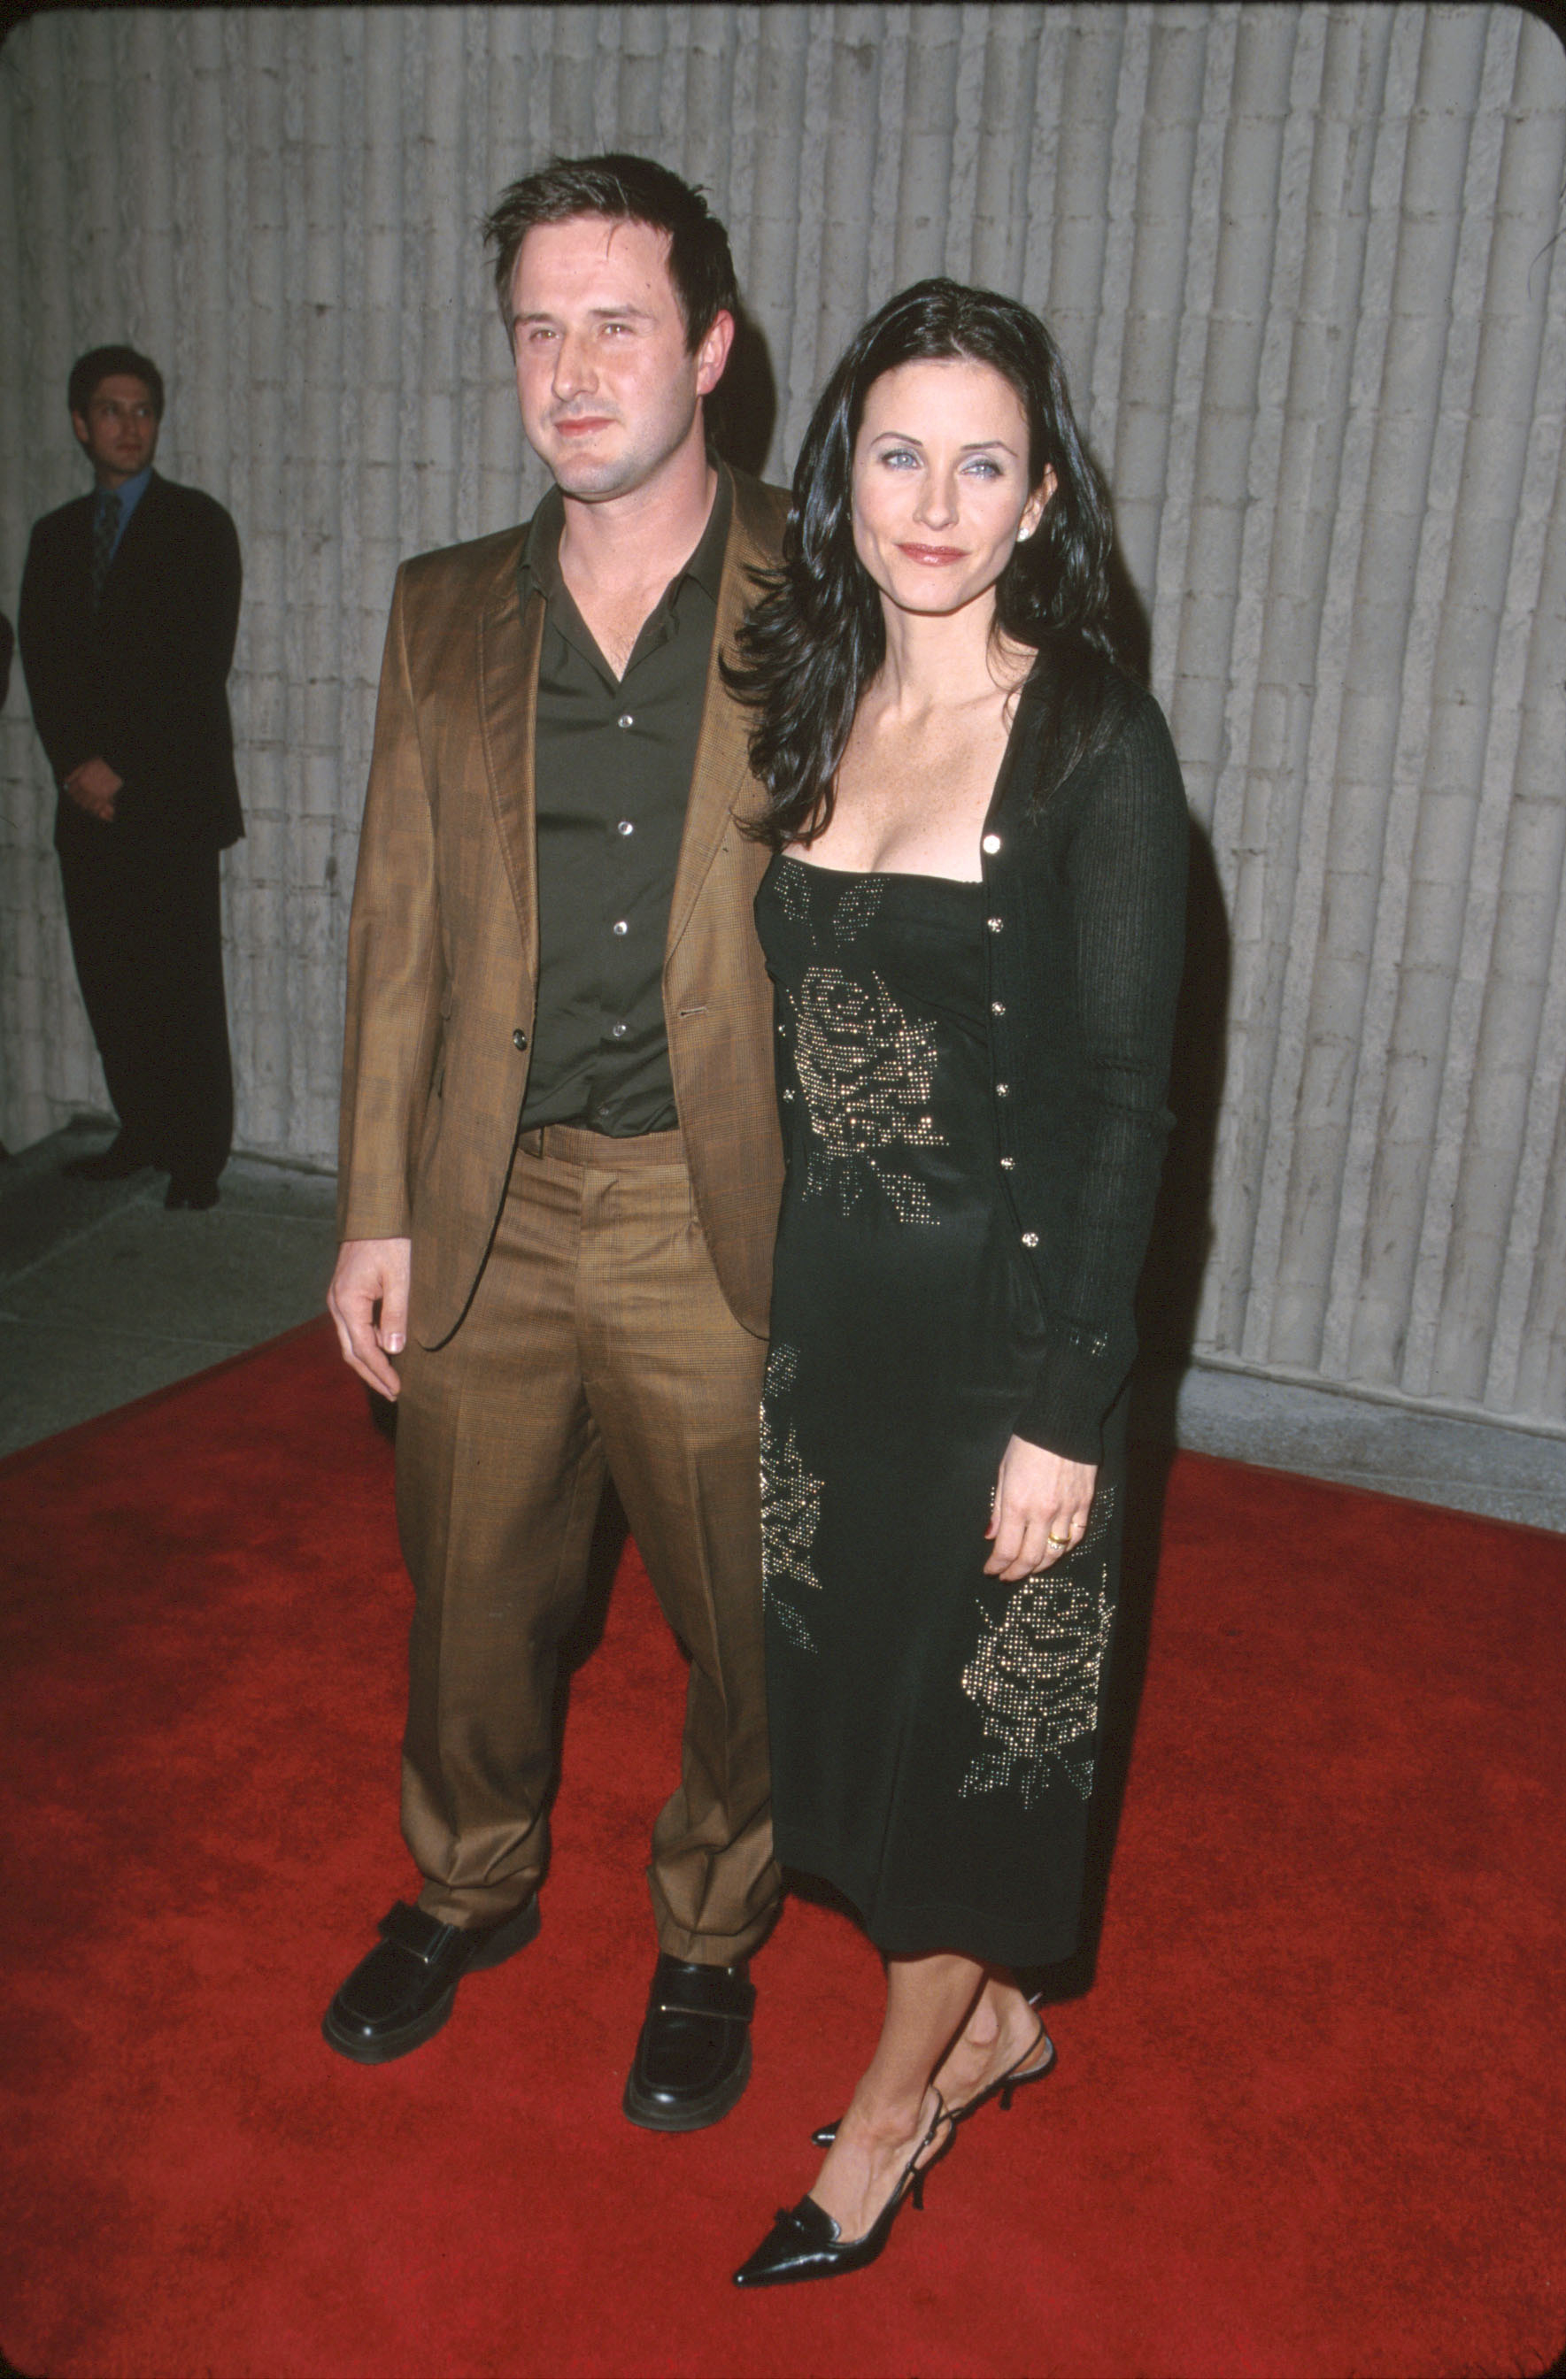 Courteney with David Arquette on the red carpet